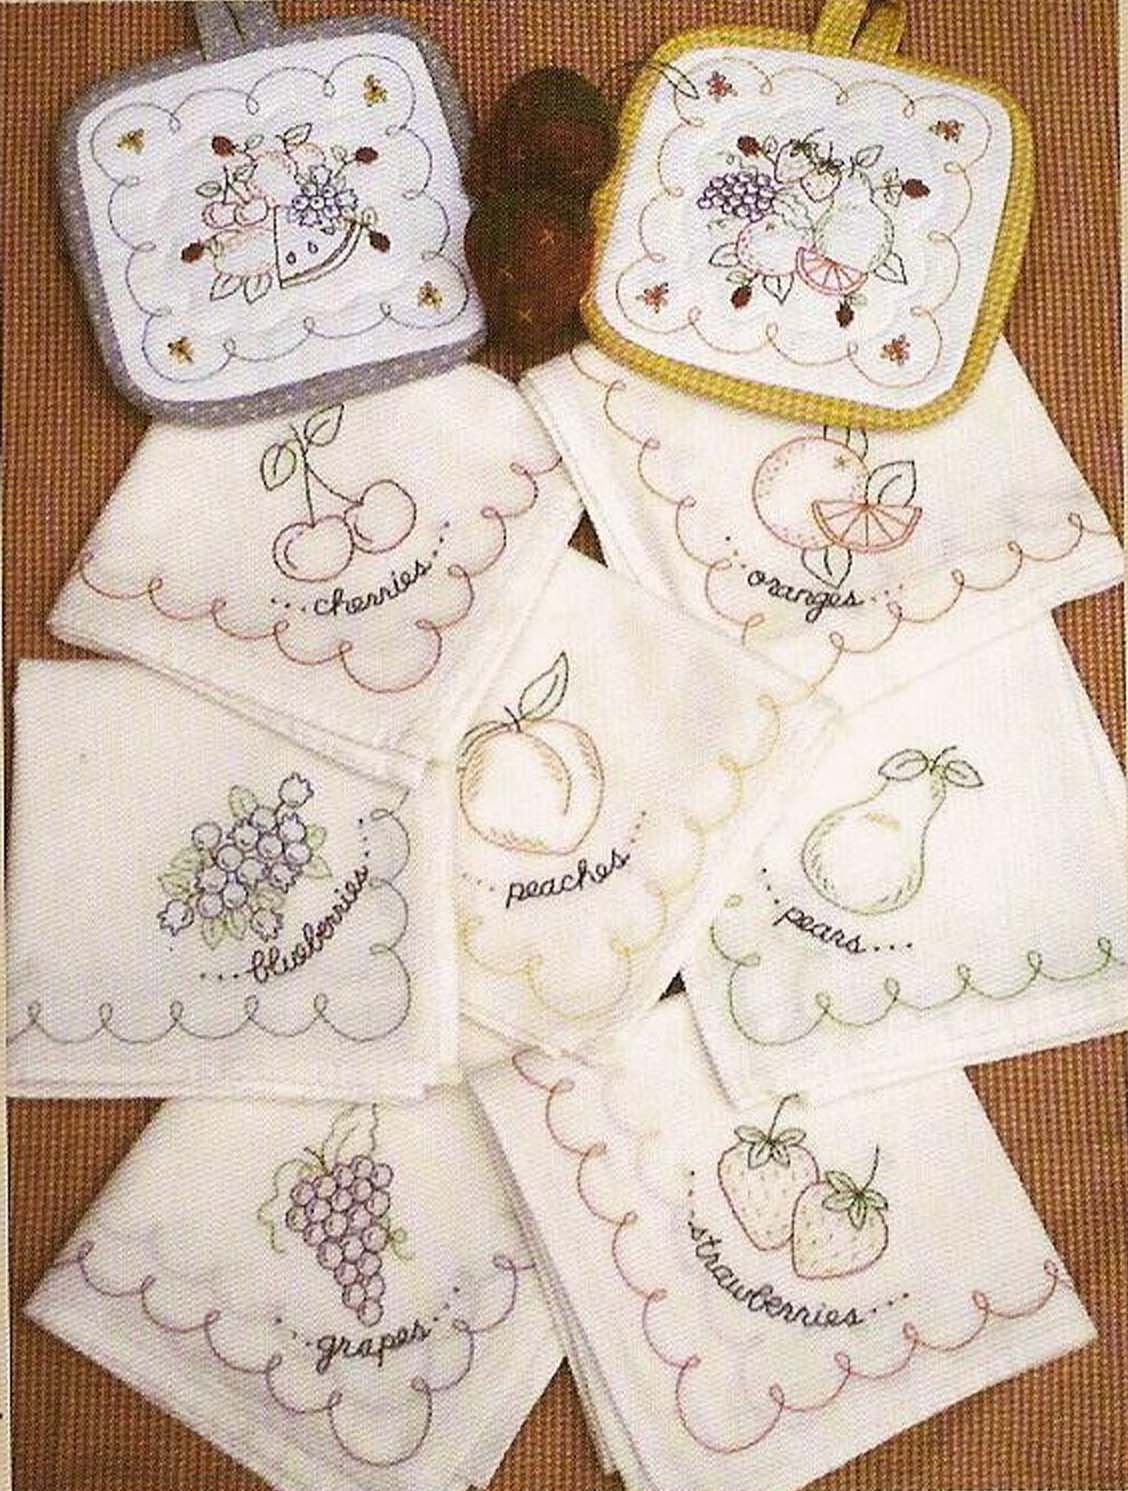 Floral Embroidery Patterns for Dishtowels